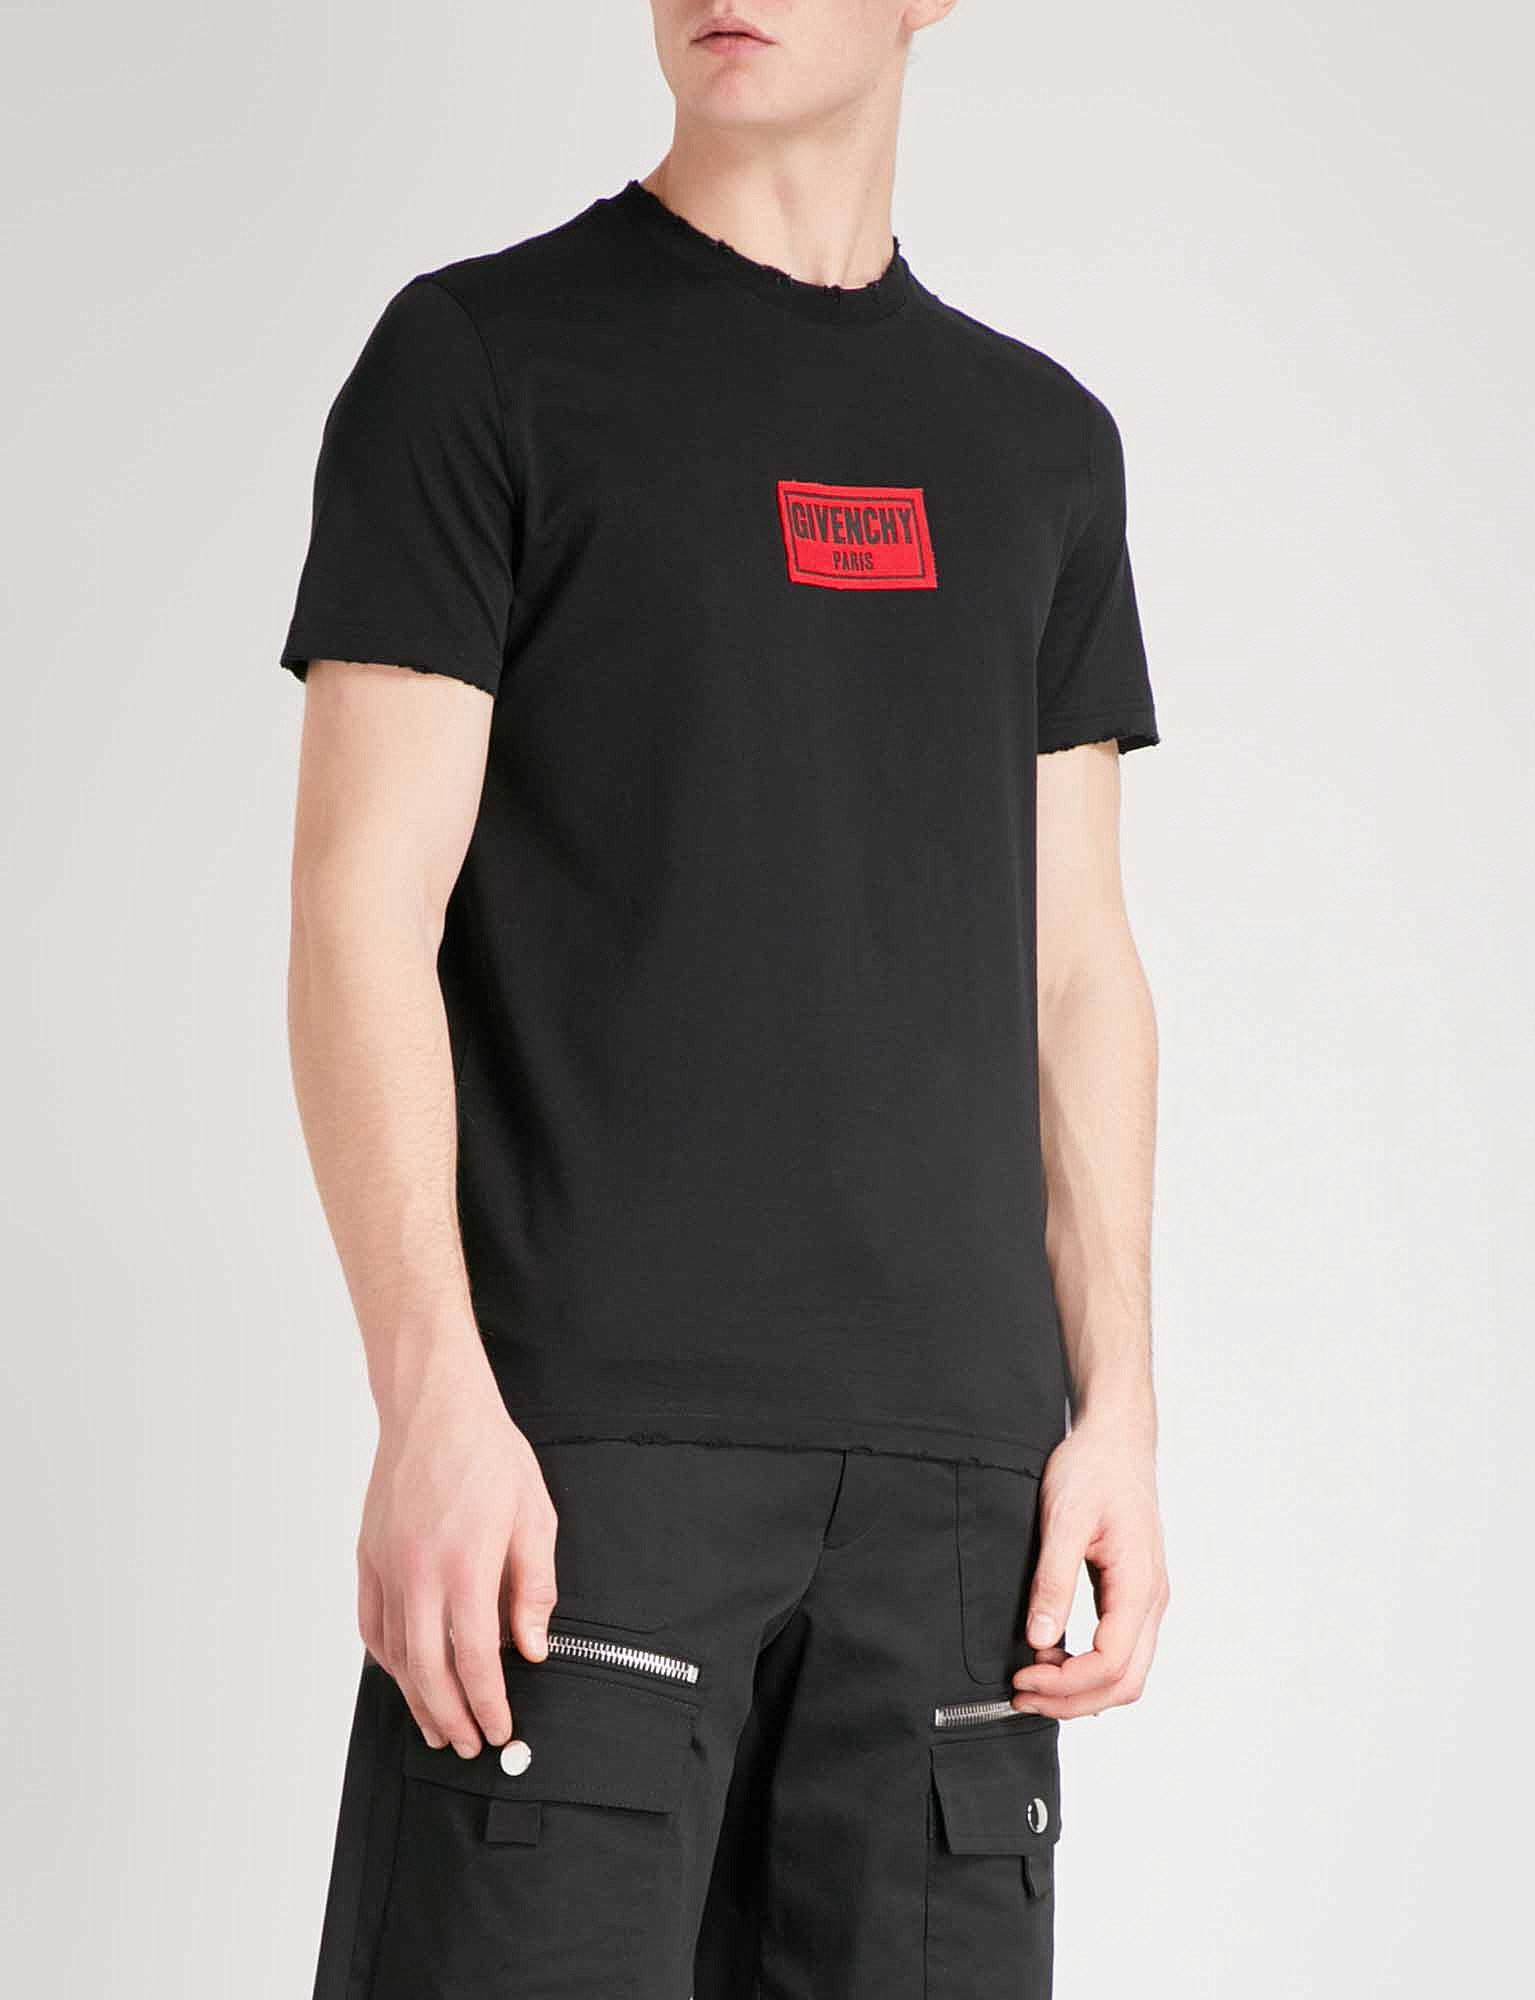 givenchy black and red t shirt